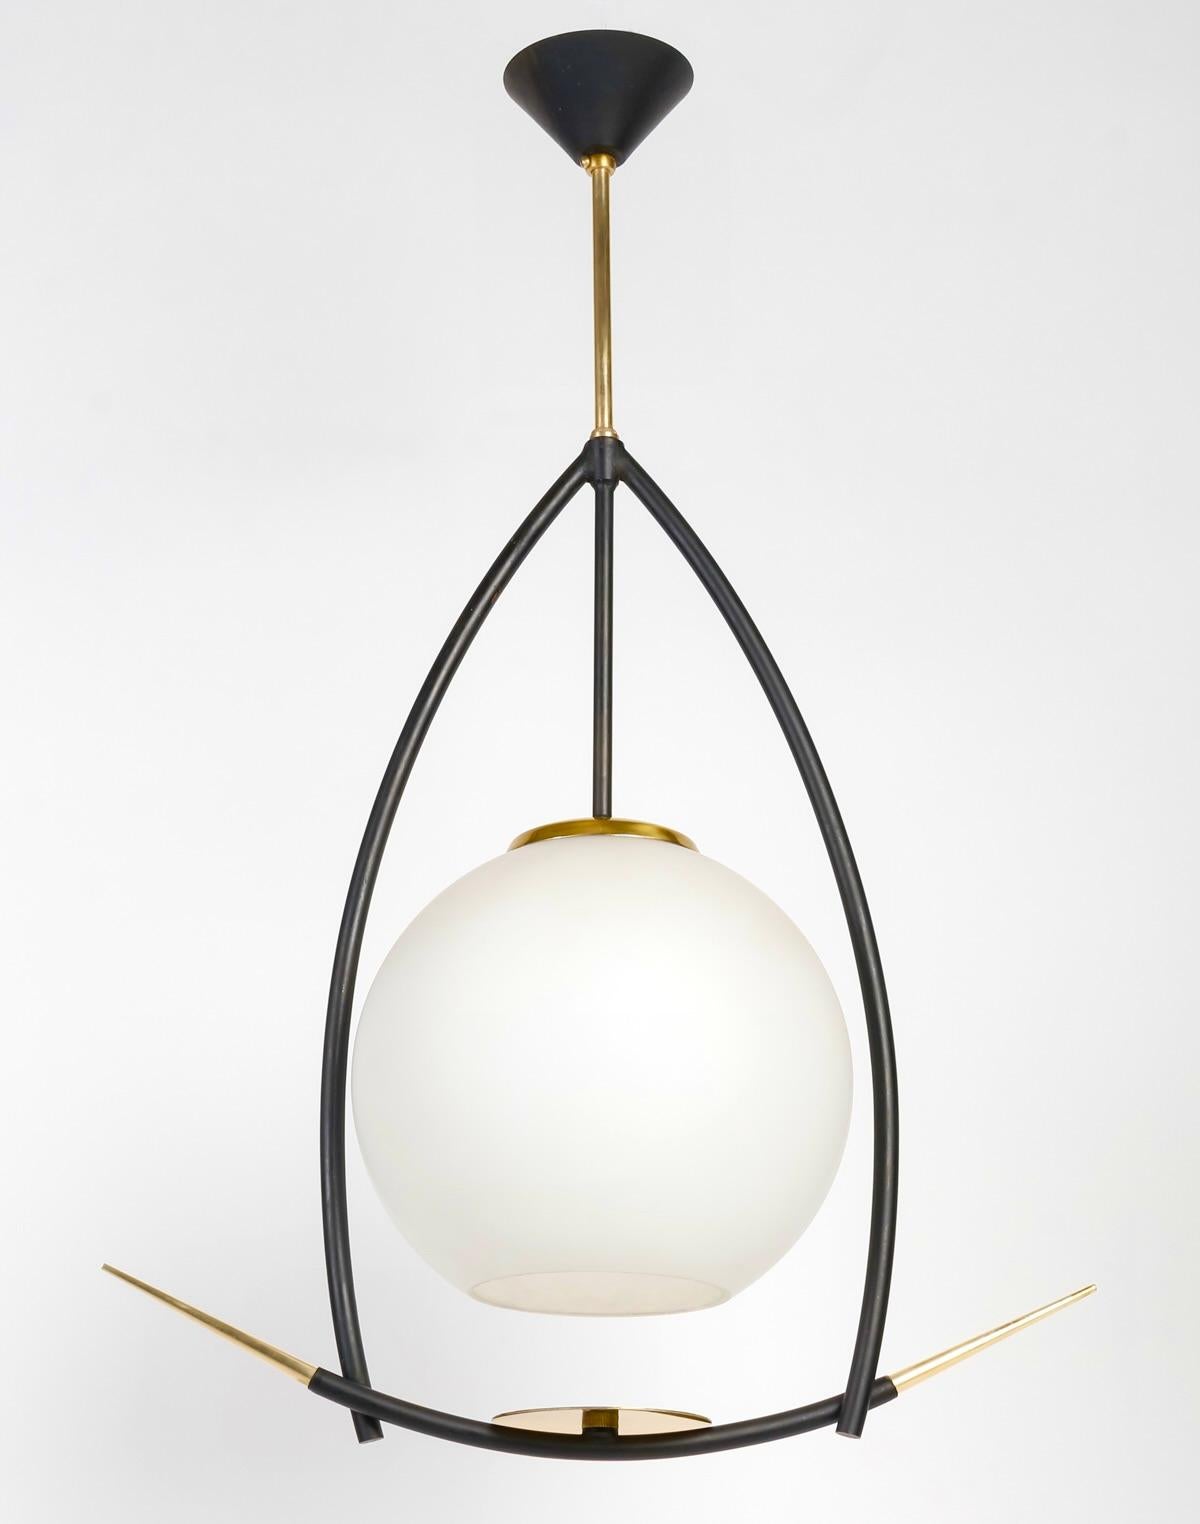 Pair of Japanese-style pendant lights by Maison Arlus
Composed of a luminous central stem in gilded brass embellished with a round satin-finish opaline at the bottom.
It is framed by two curved black wrought-iron rods, underlined at the bottom by a